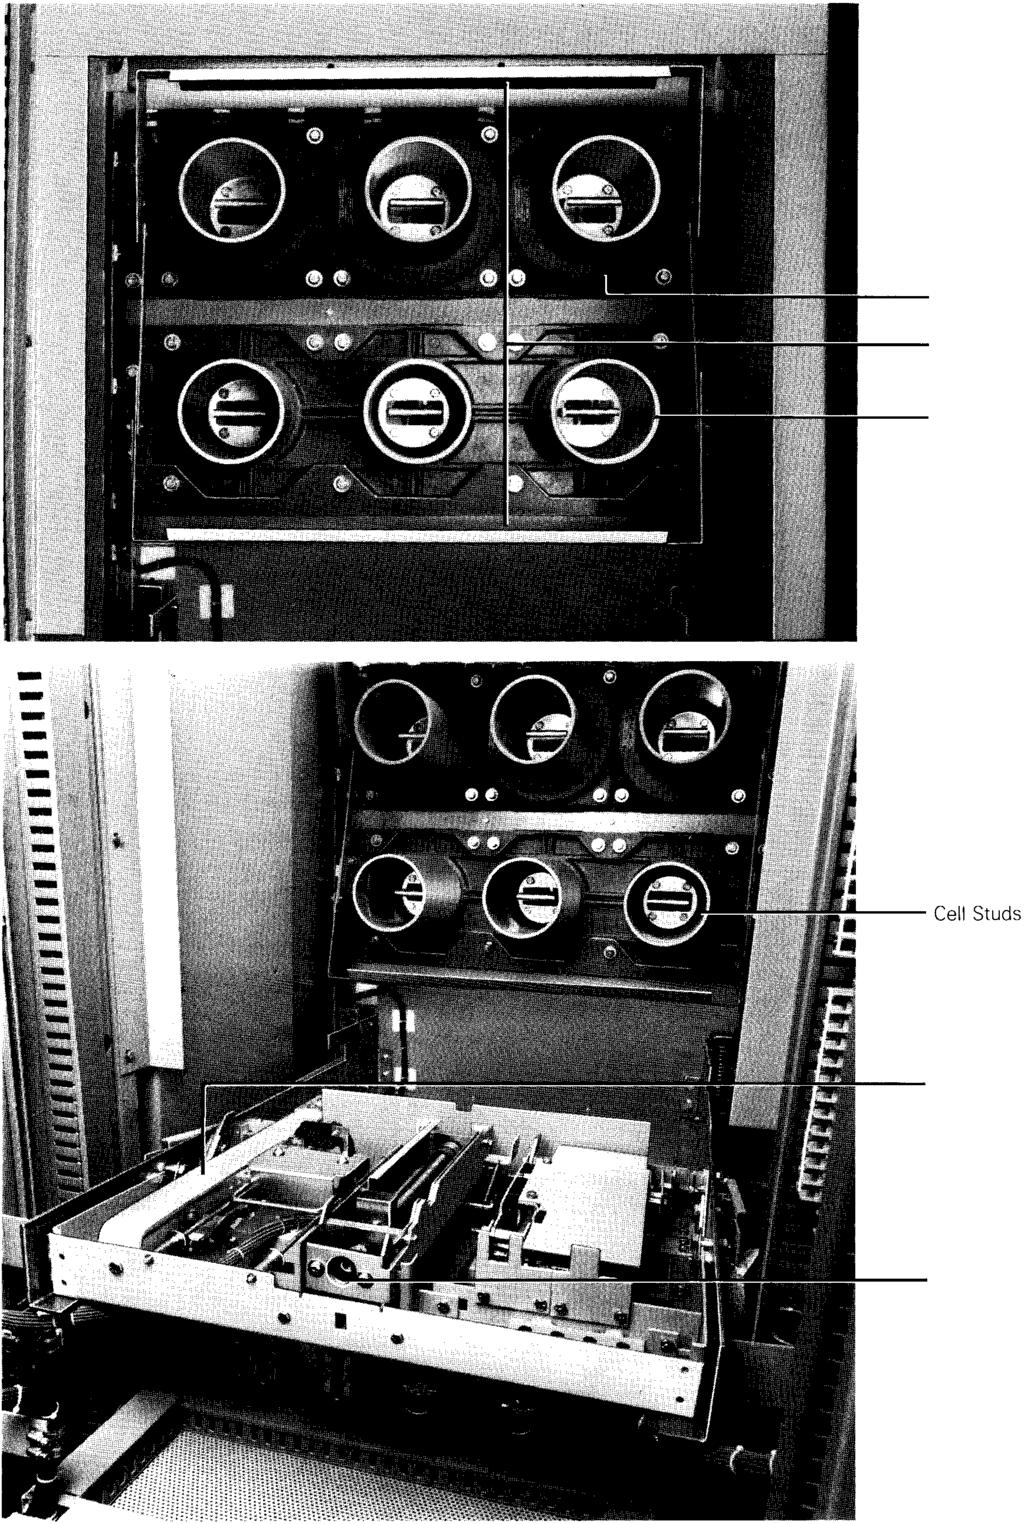 June, 1987 Page 7 Type VacCiad-W Mediu m Voltage Metal-Clad Switchgear Performance, Continued Cell Features The breaker compartment is shown with the automatic steel shutters forced into the open